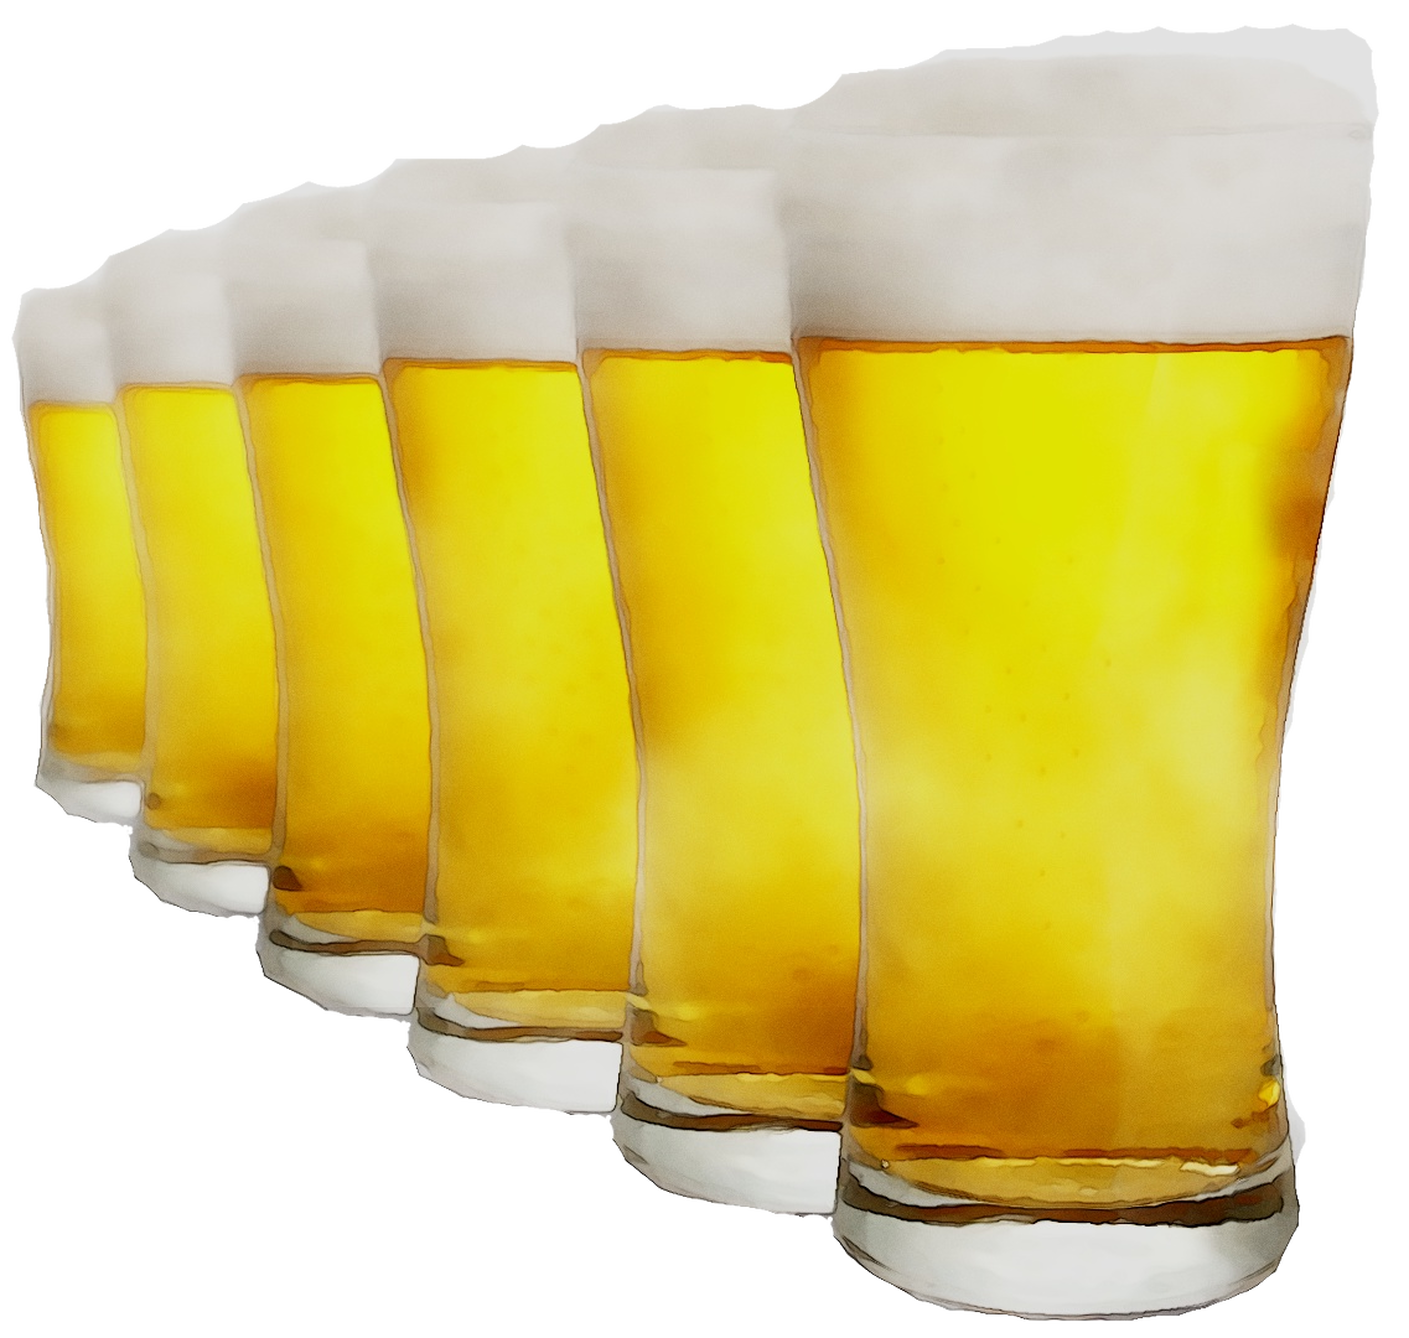 Beer Imperial Pint Glasses Free Clipart HD Clipart